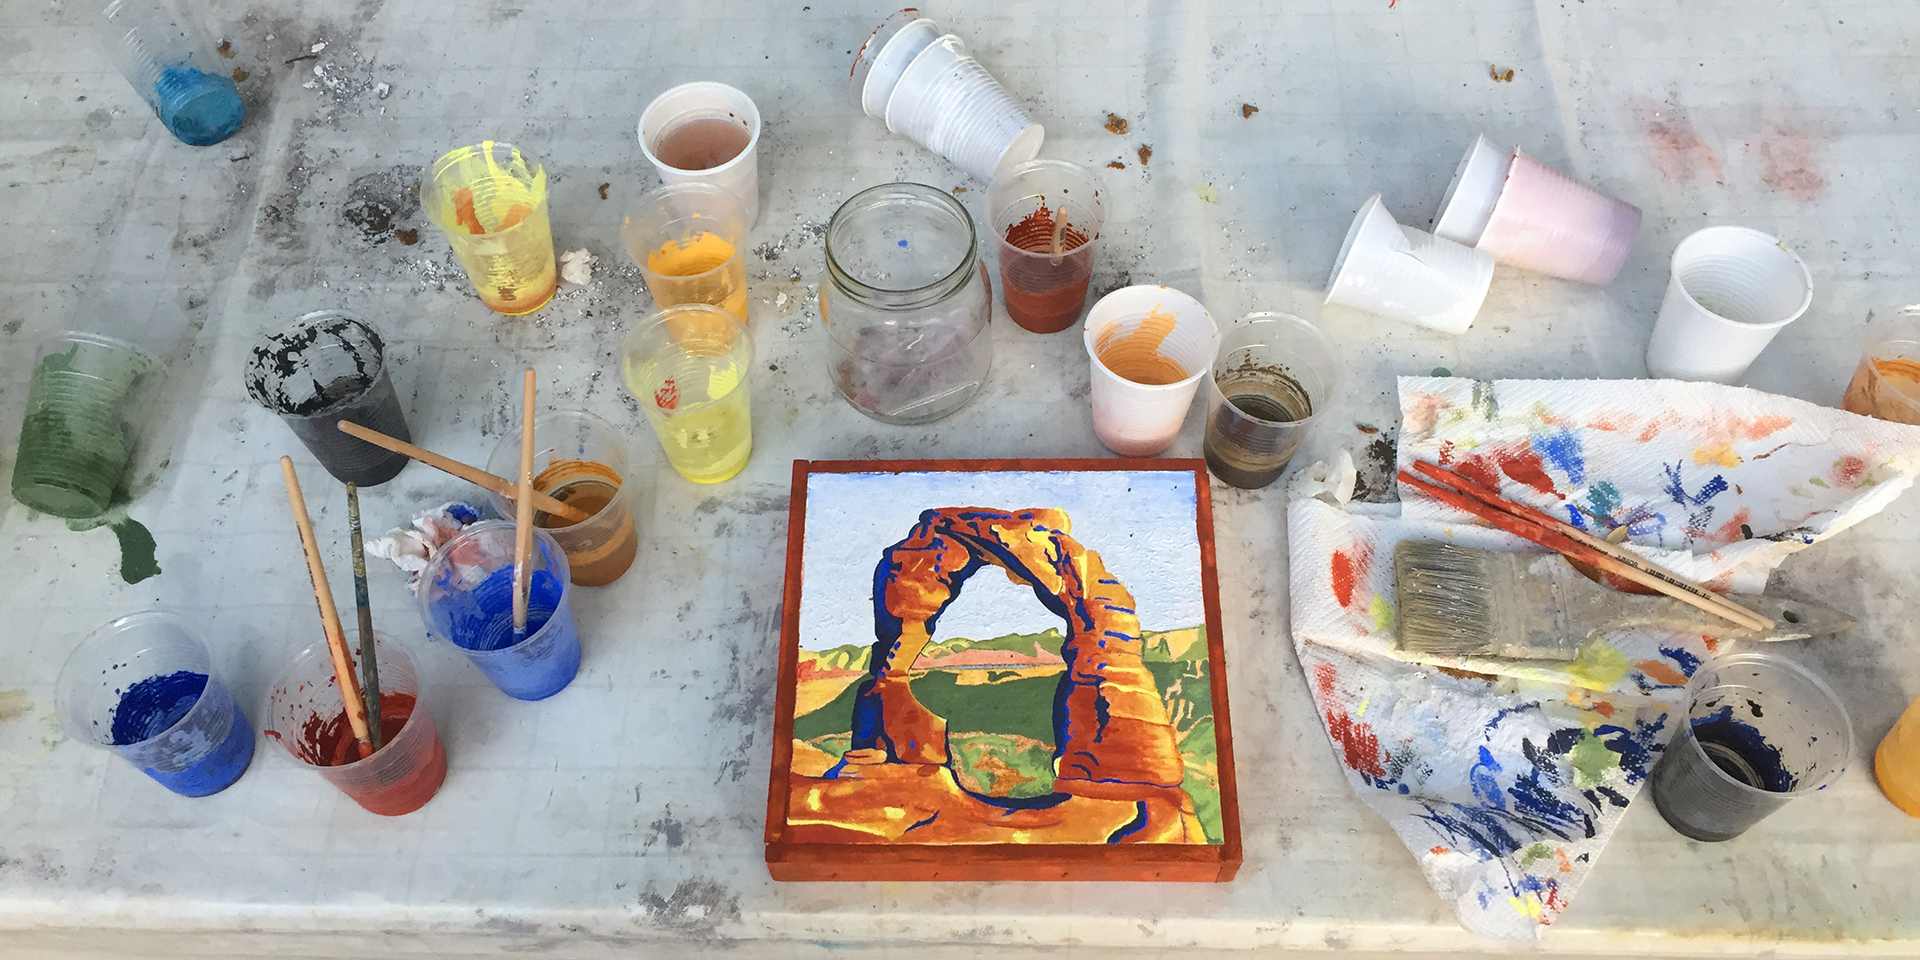 ONE-MA3 – Day VII: Creating our own frescoes!